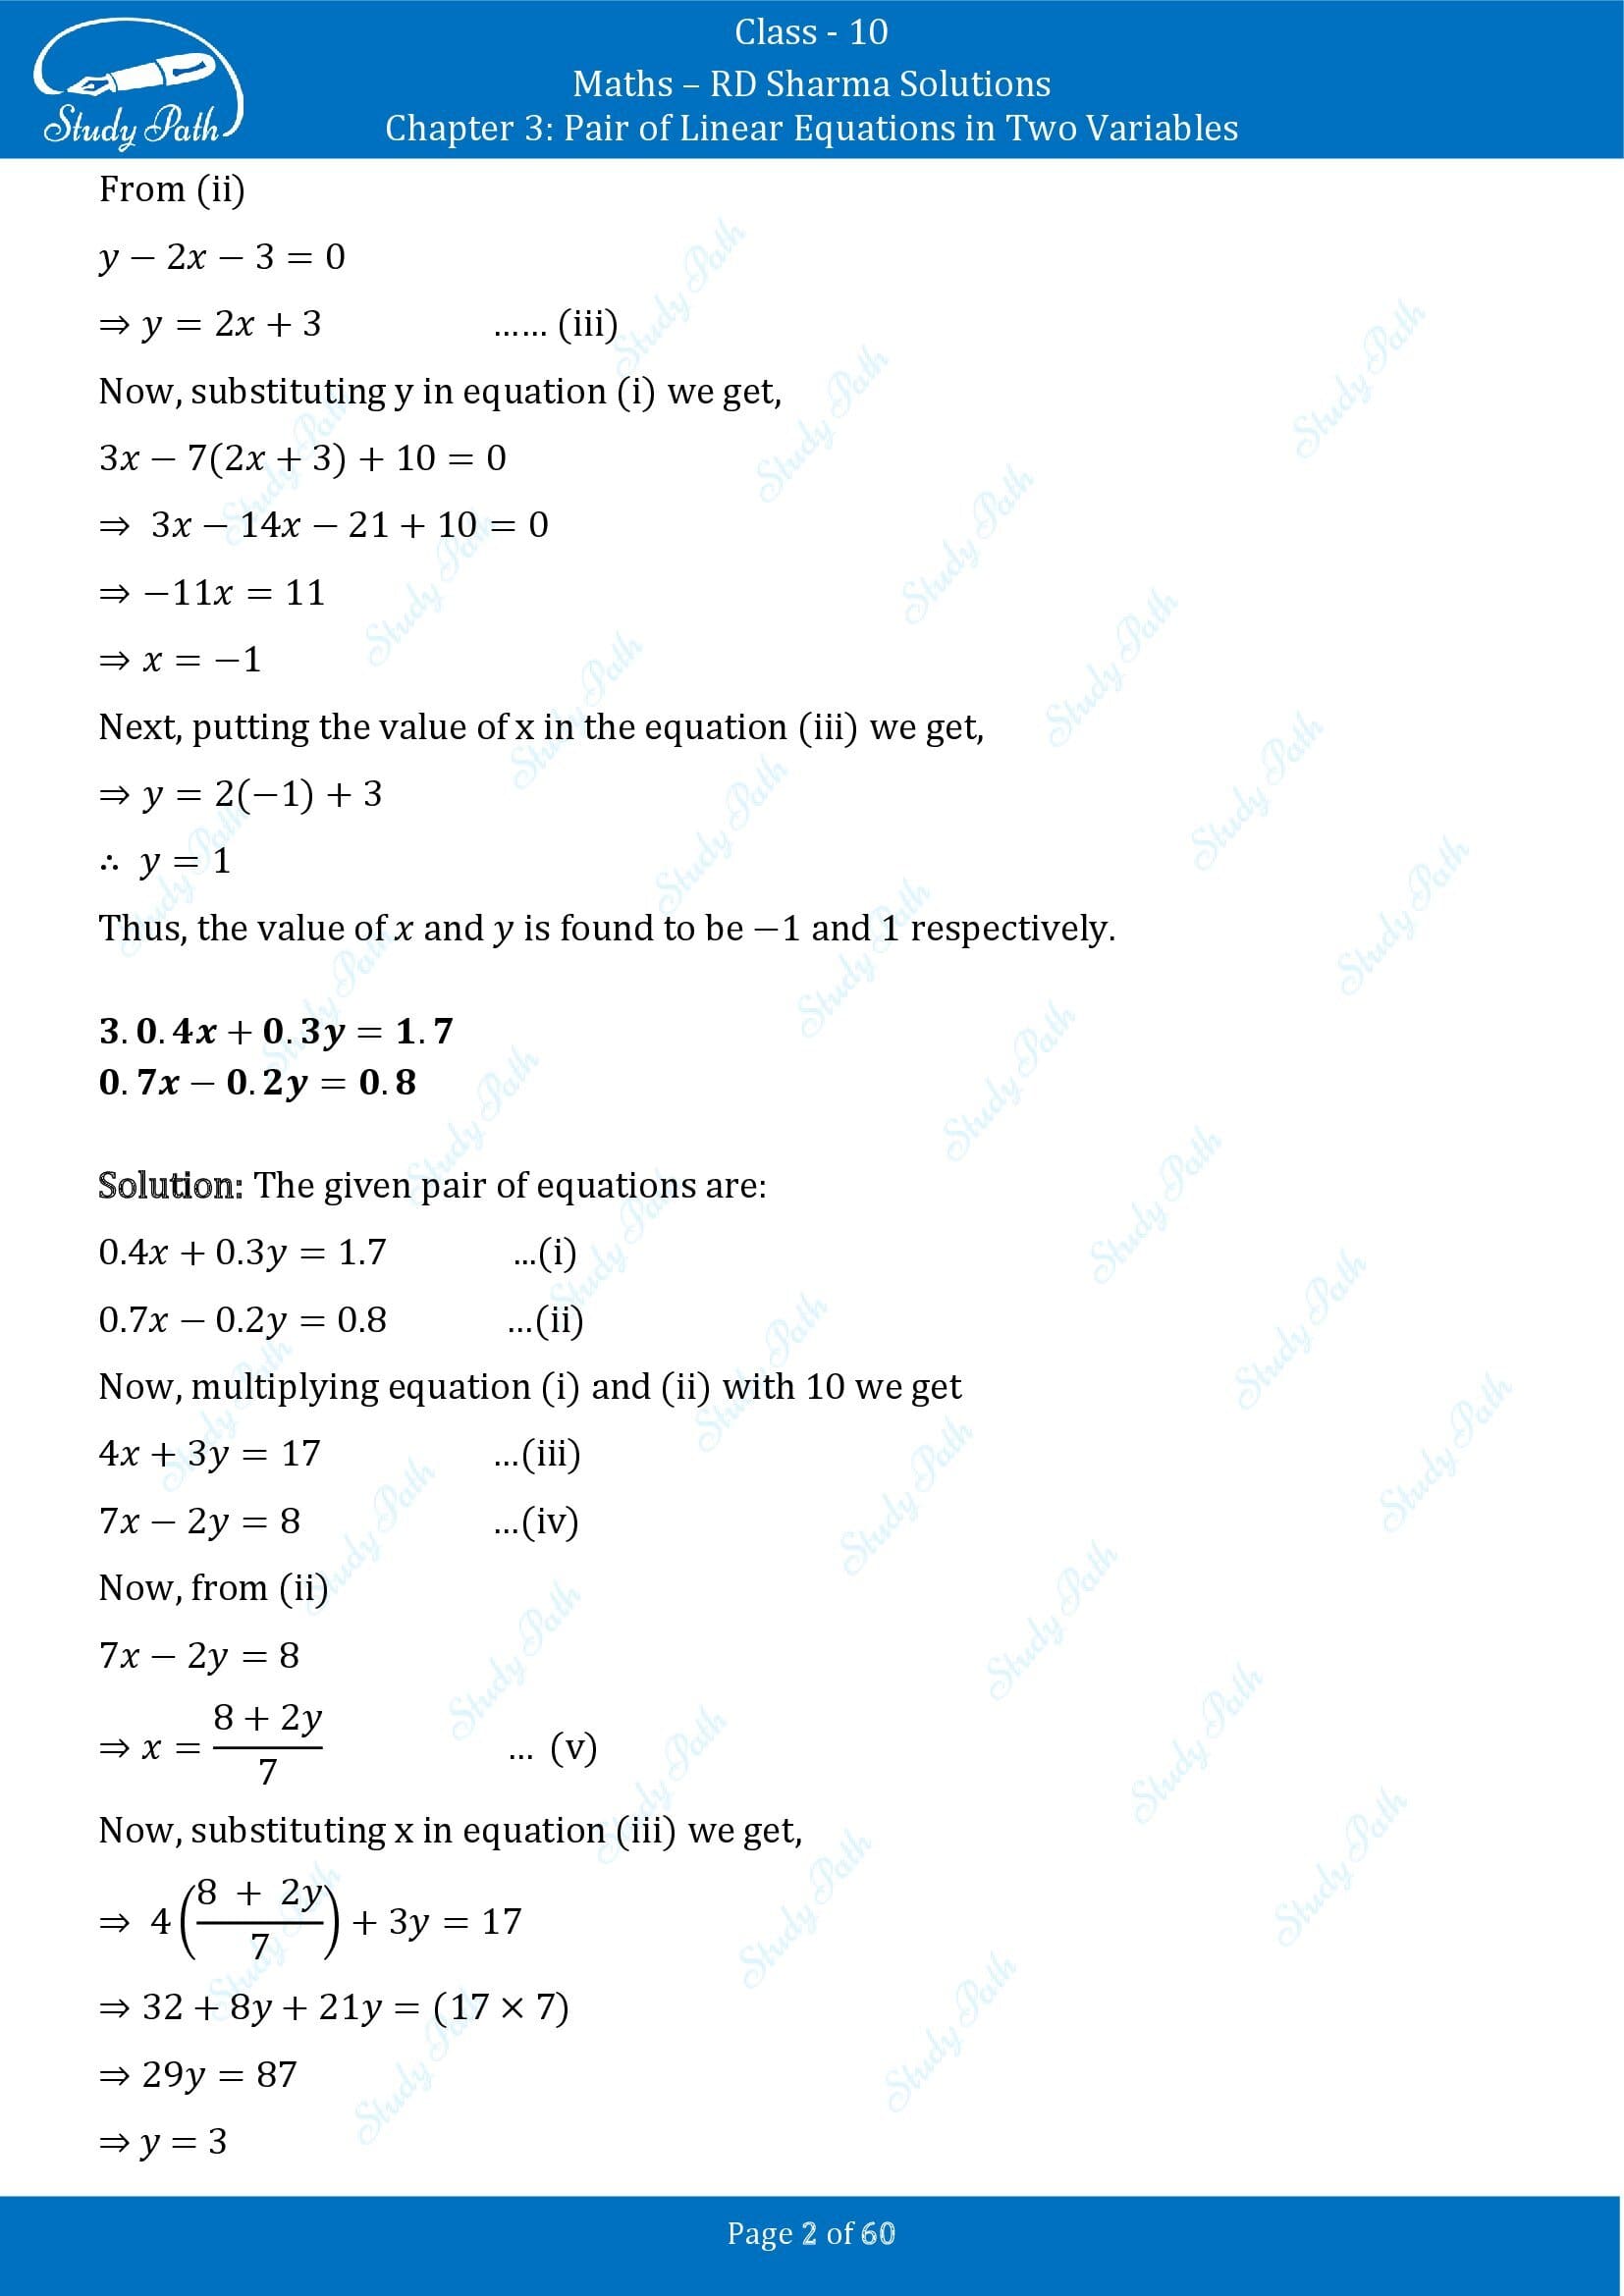 RD Sharma Solutions Class 10 Chapter 3 Pair of Linear Equations in Two Variables Exercise 3.3 00002